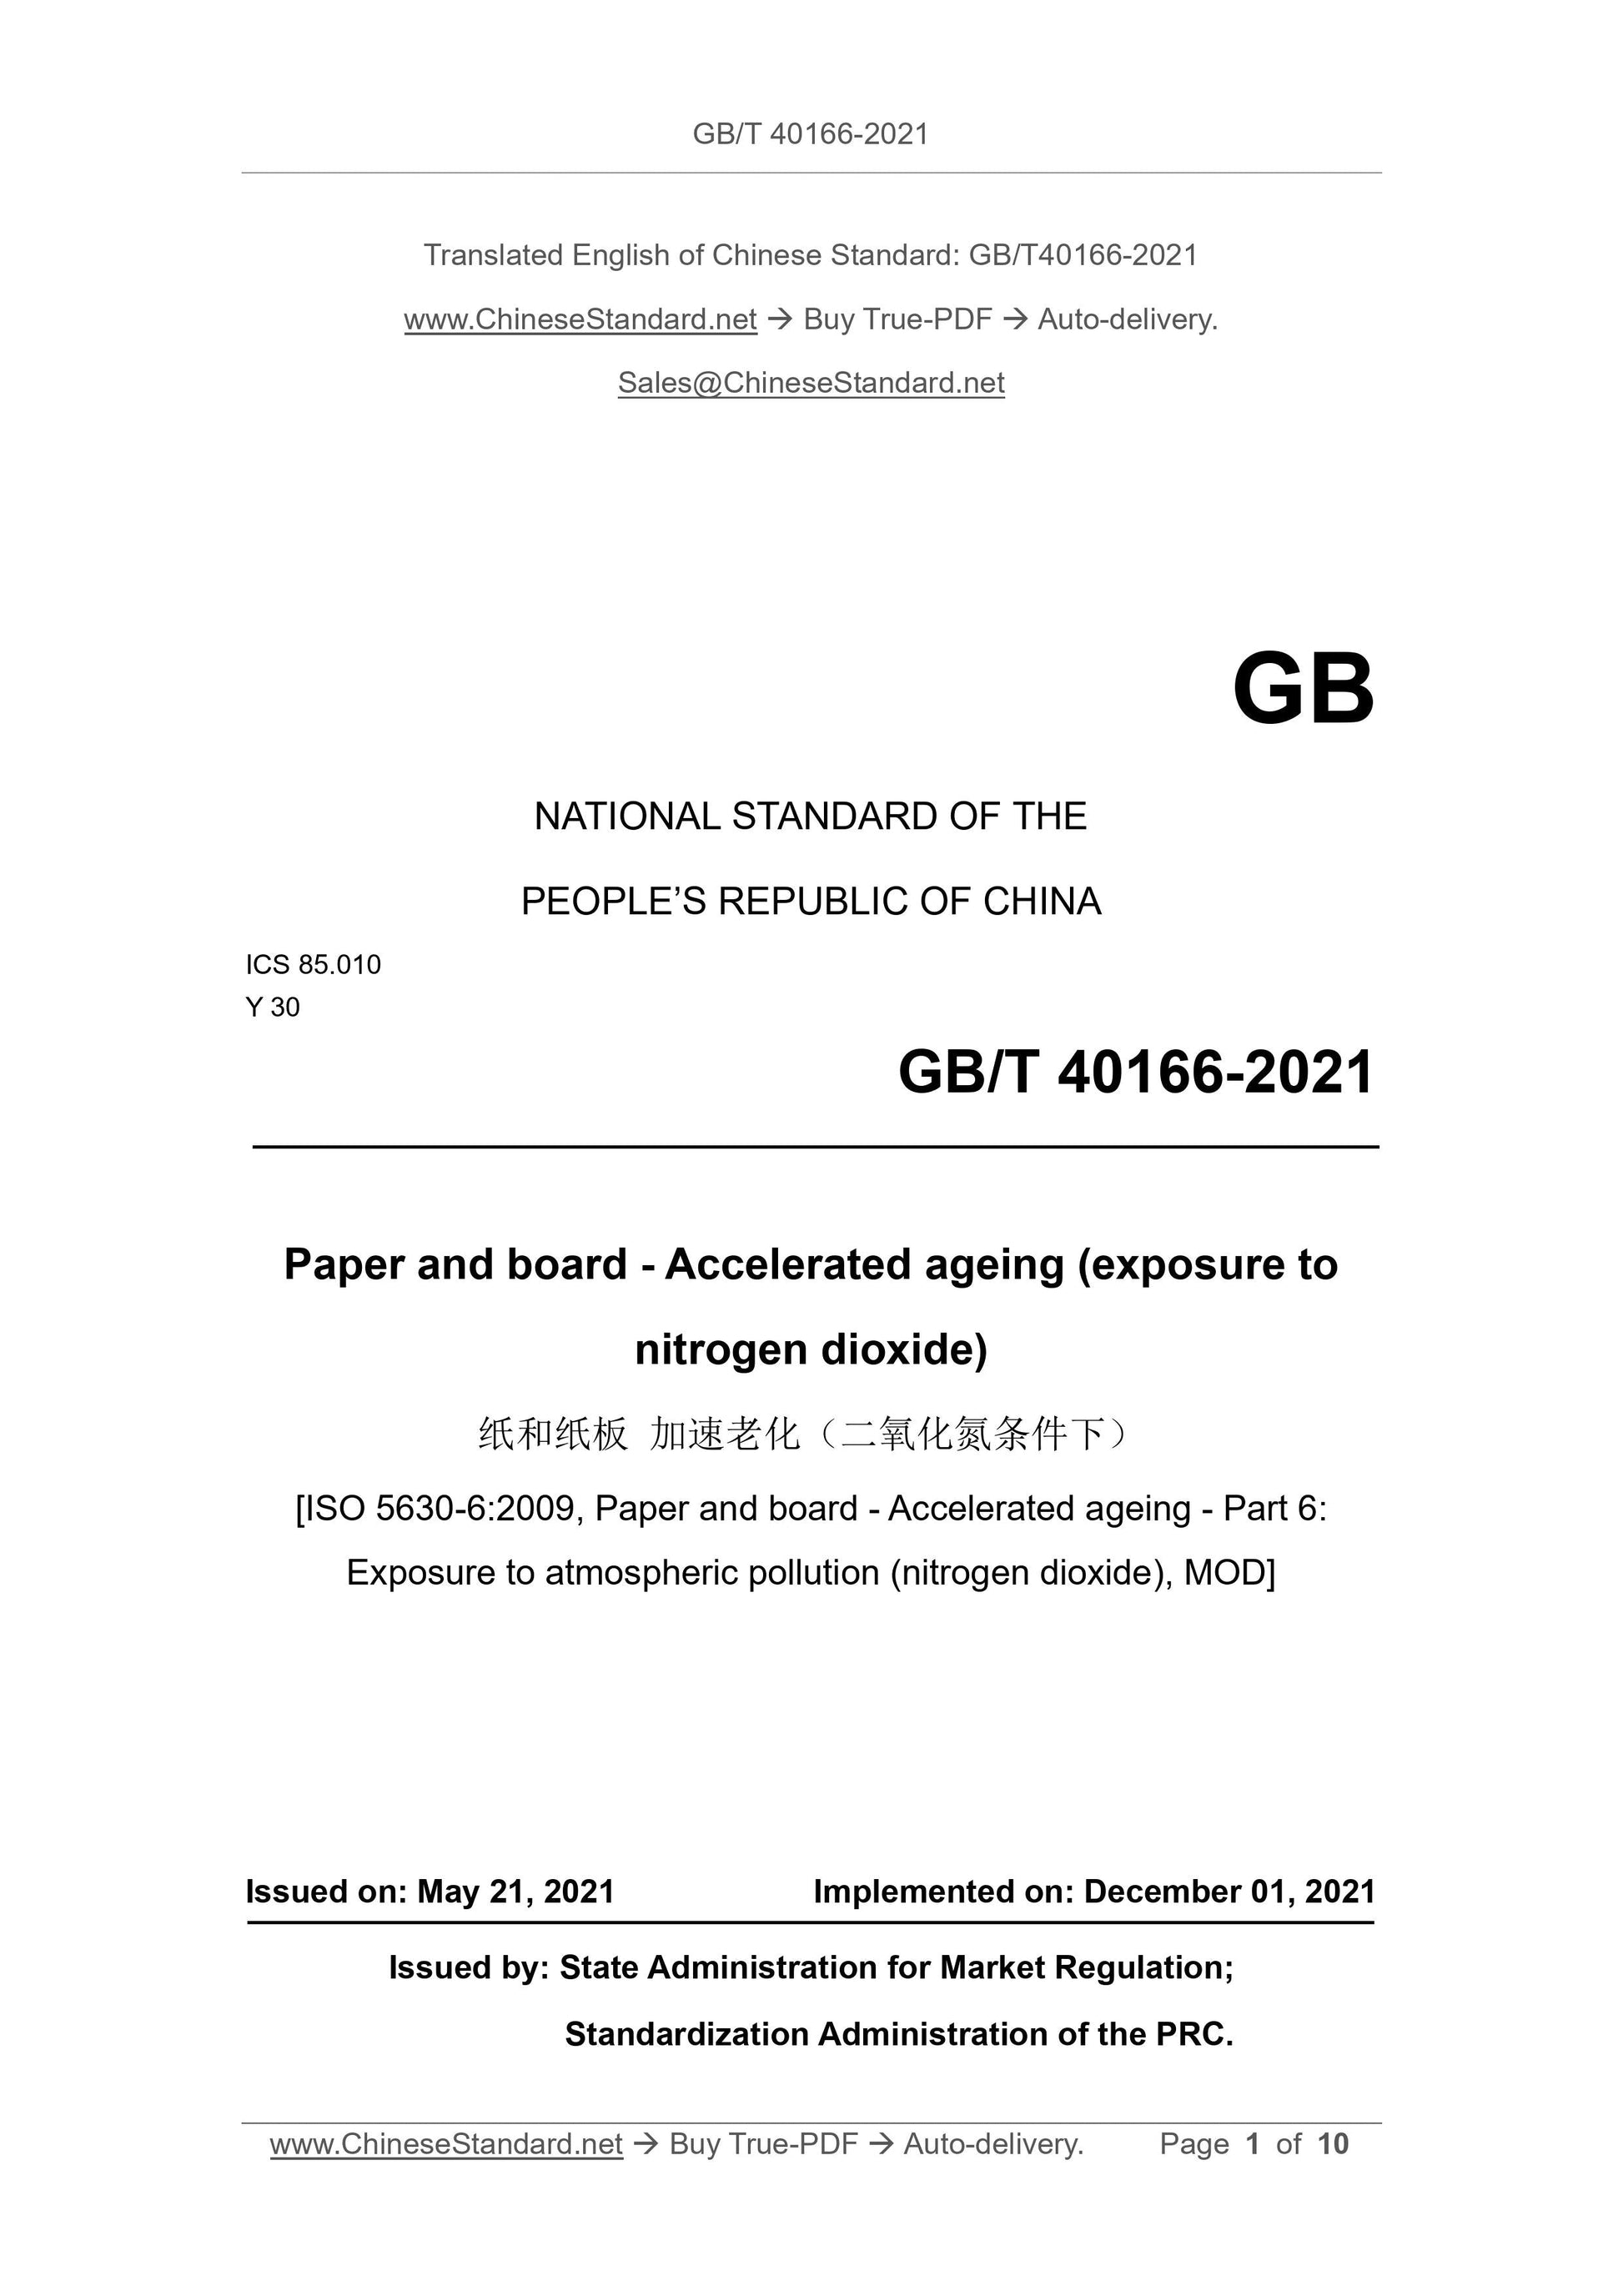 GB/T 40166-2021 Page 1